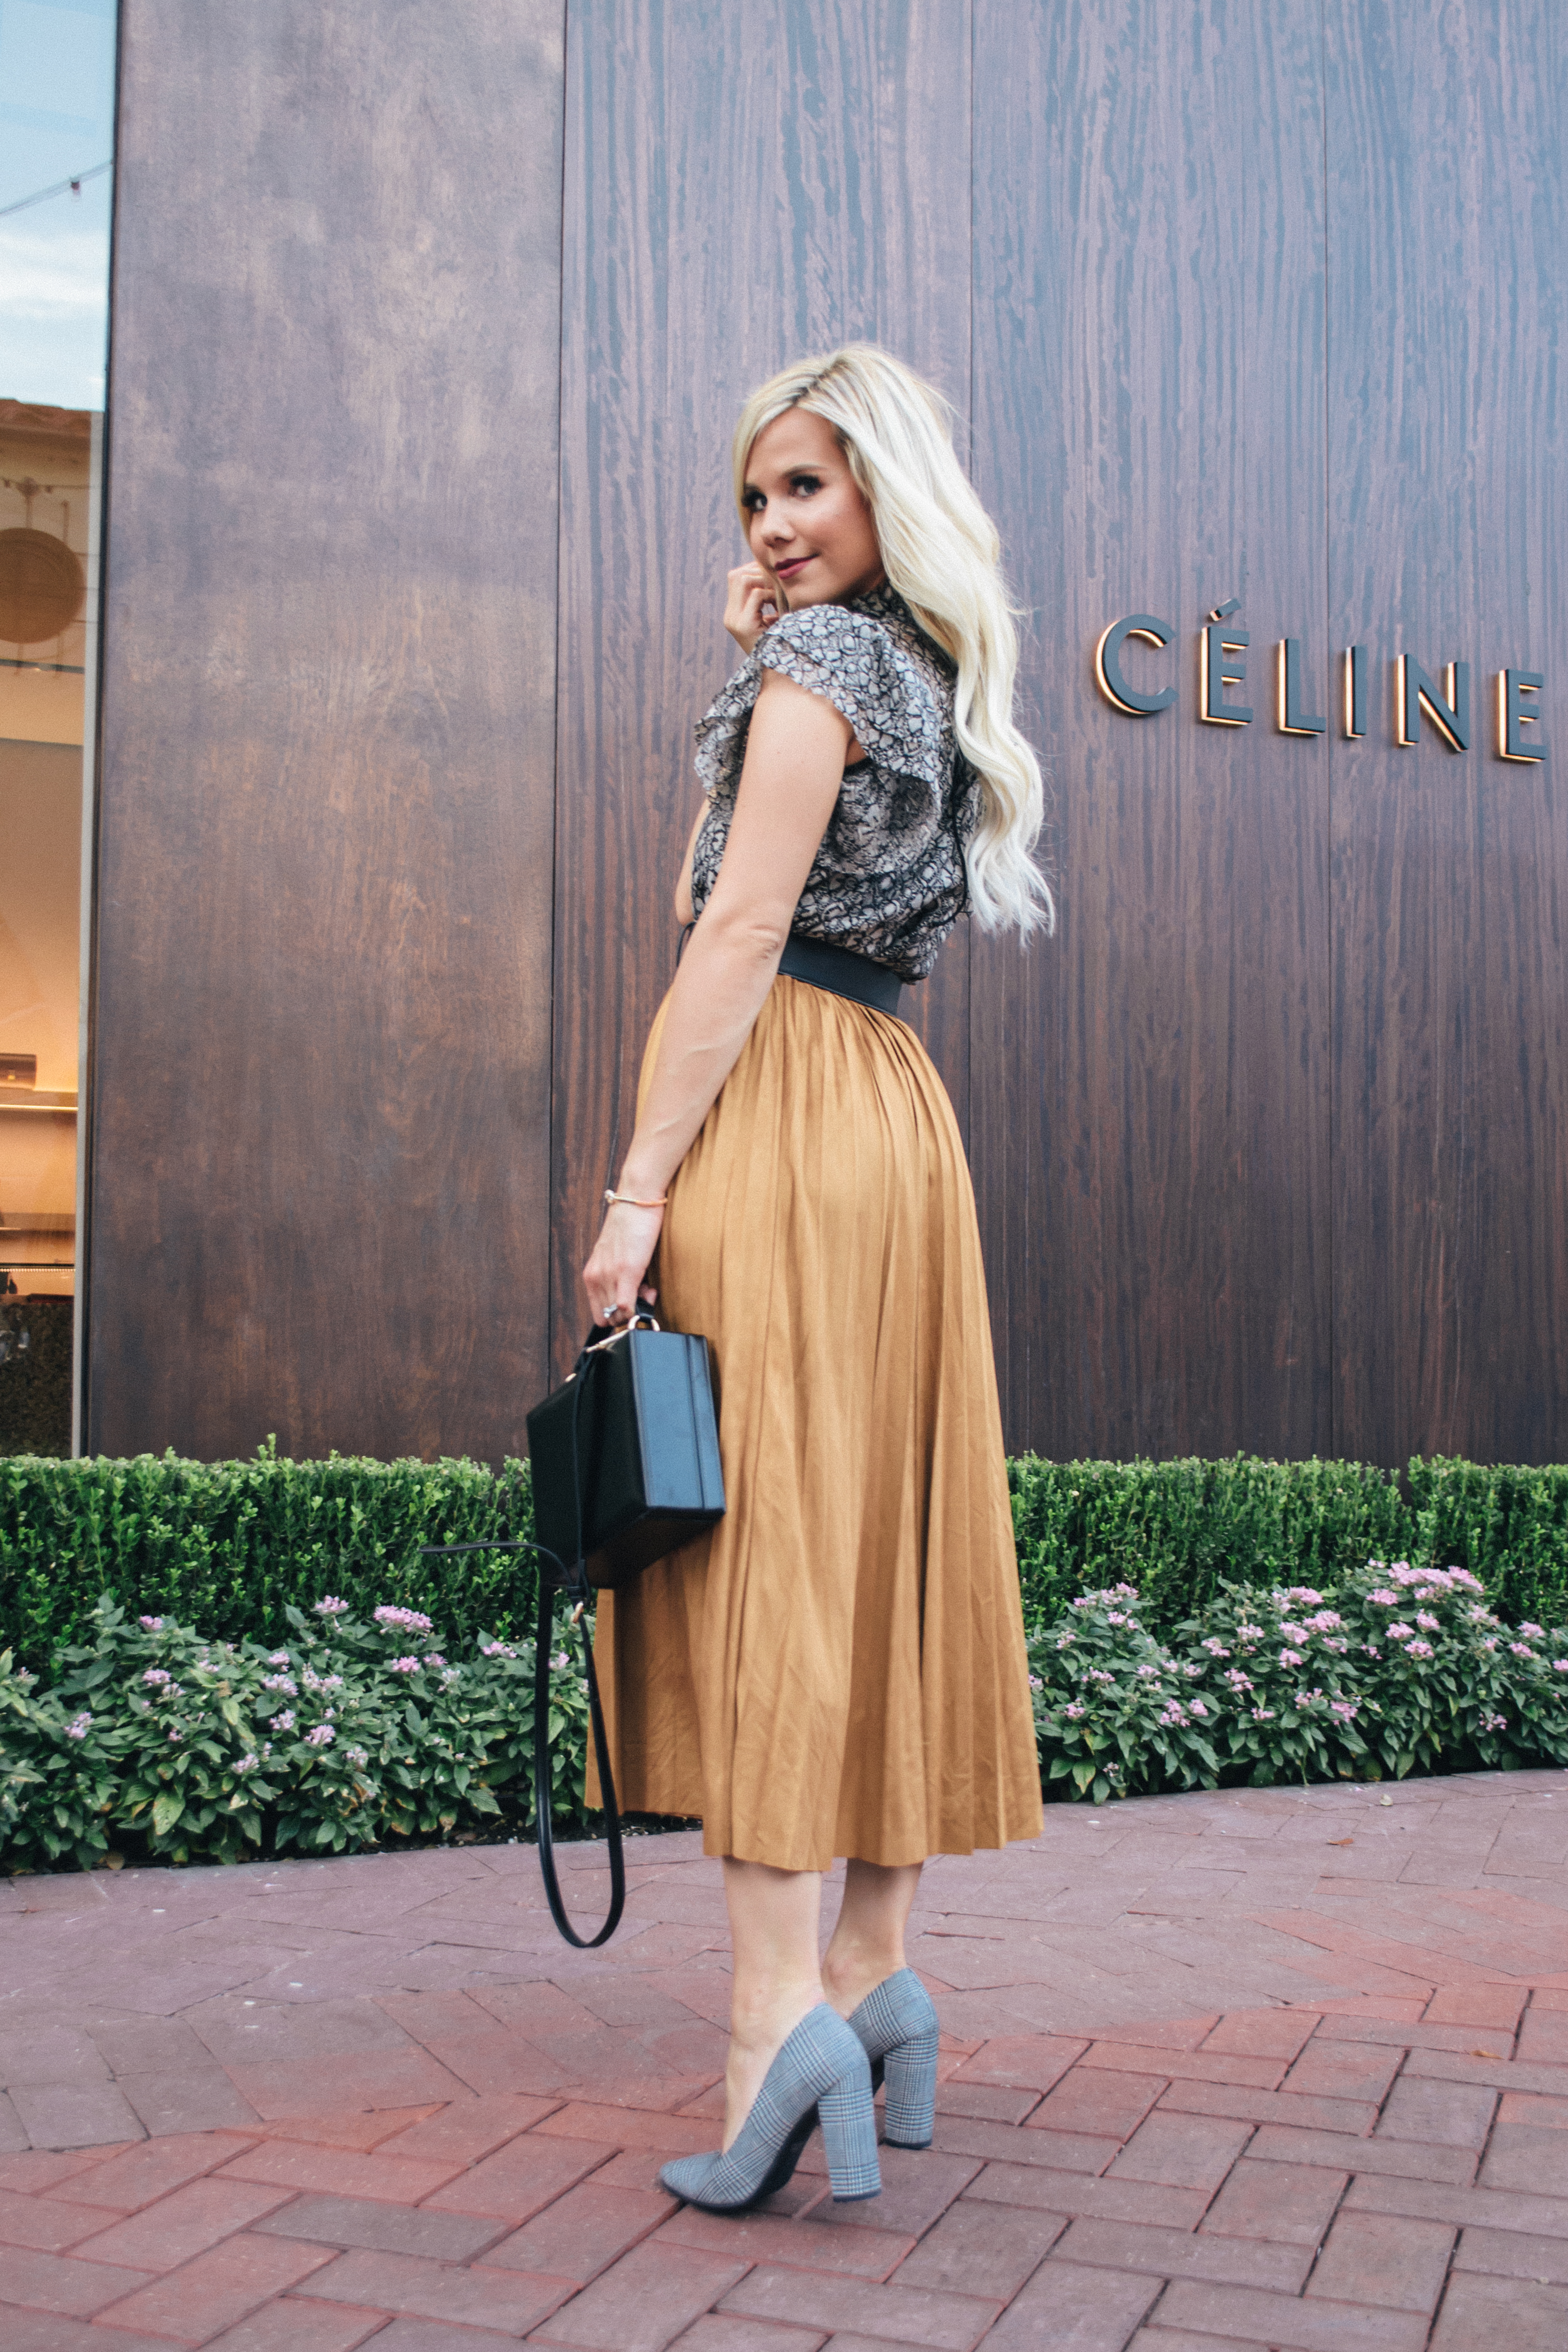 These fall fabrics are on serious trend for the fall 2018 season. Hannah McDonnell of Glam Life Living is breaking down what to wear for fall in this pleated faux suede skirt on Glam Life Living #fallotufit #falltrends #fallfashion #outfit